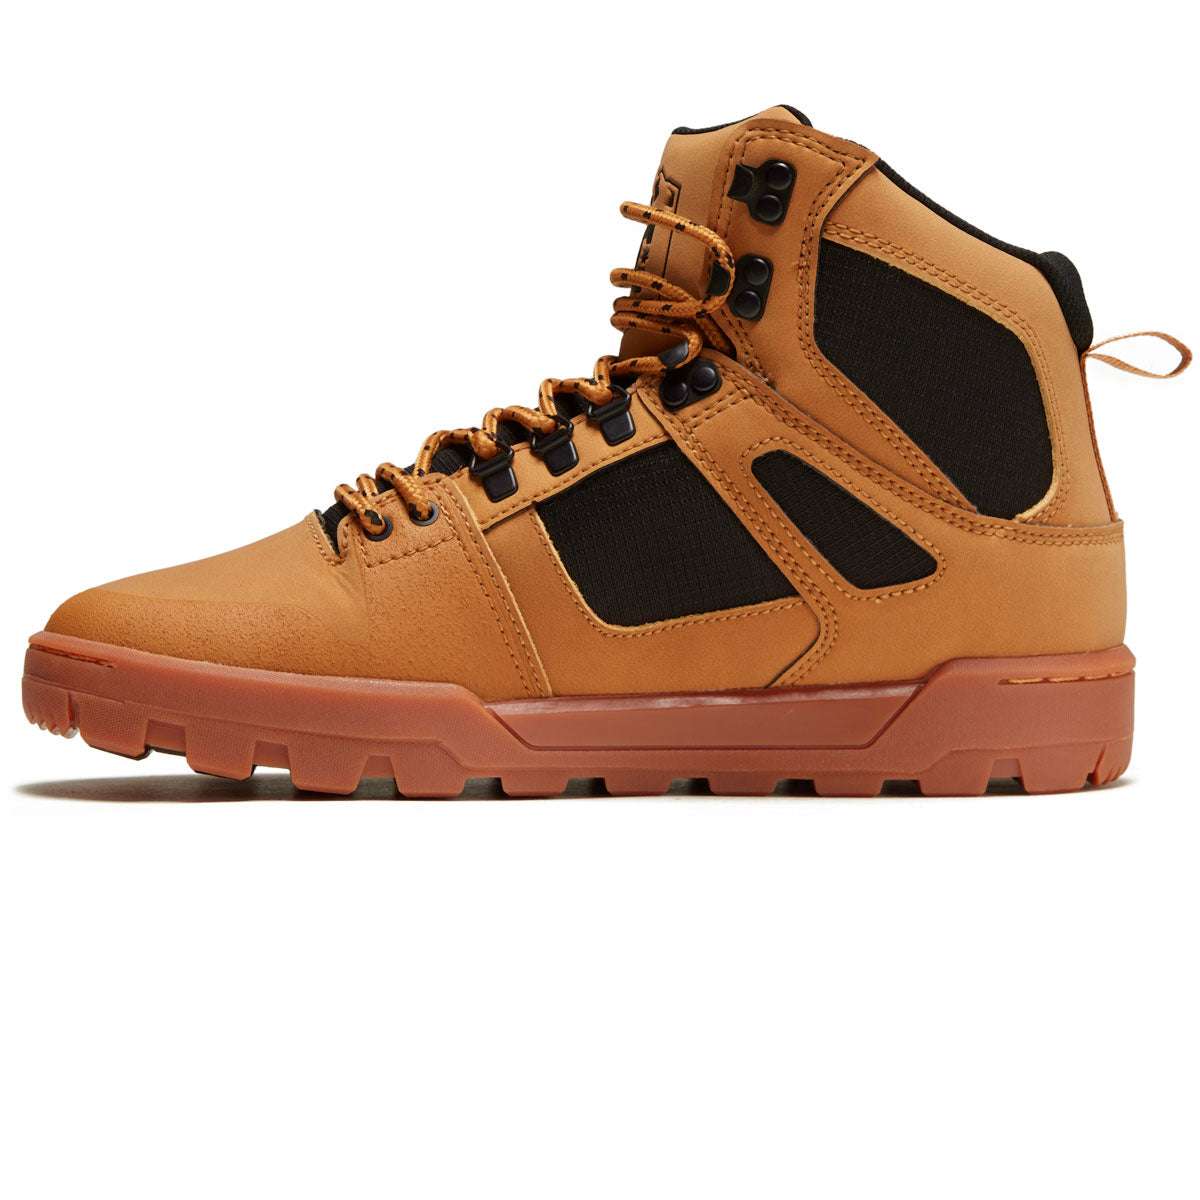 DC Pure High-top Wr Boots - Wheat/Black image 2